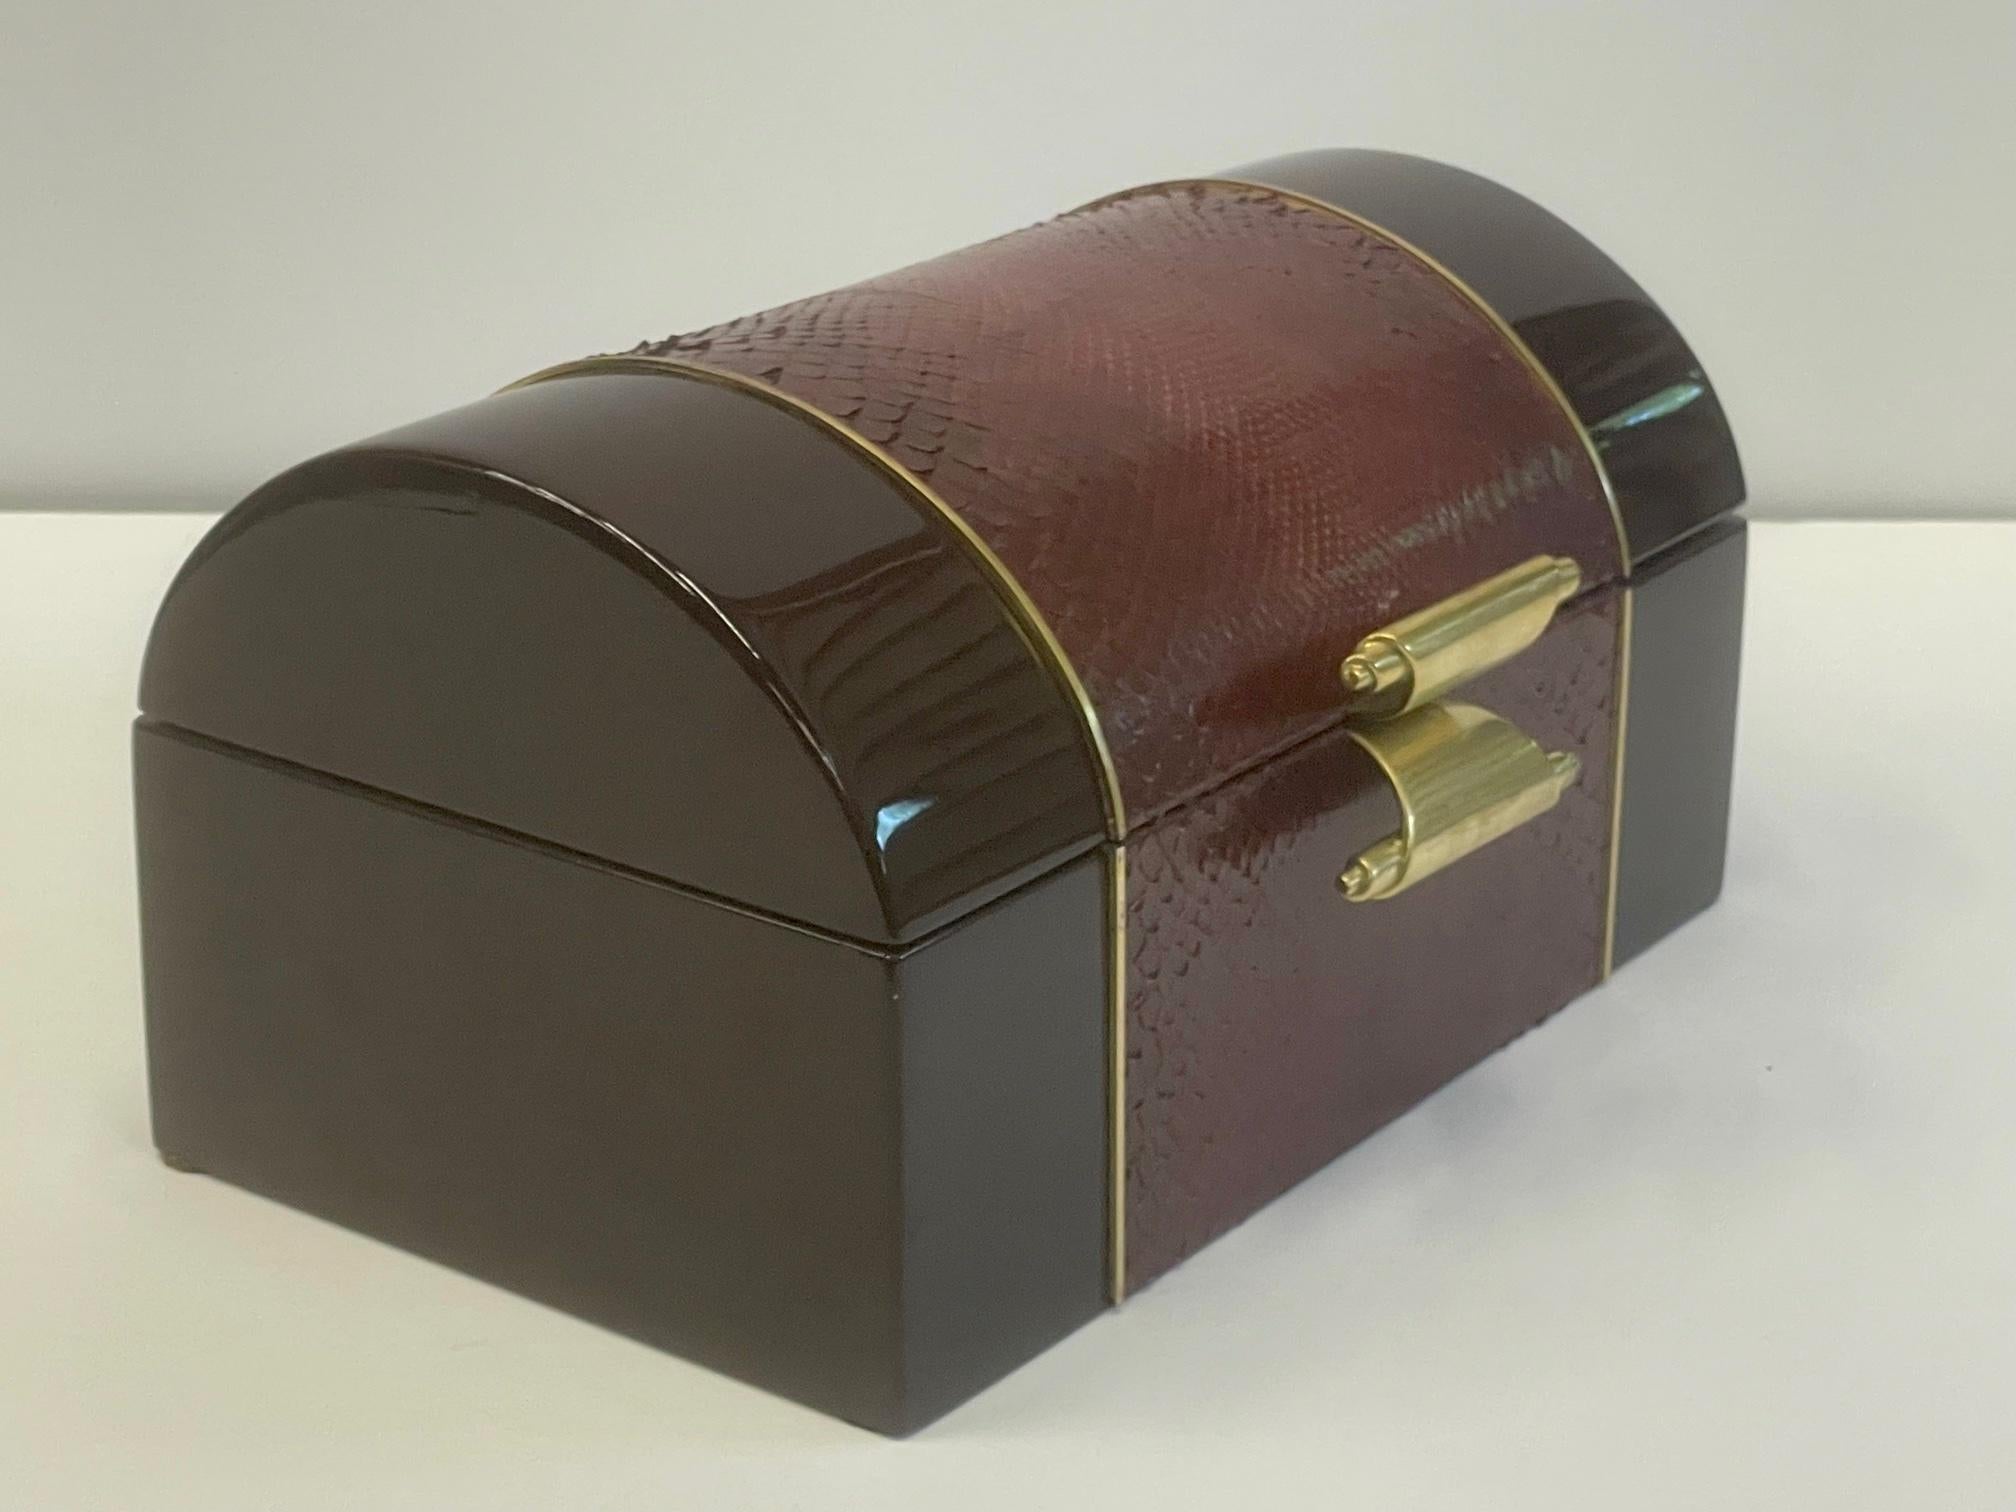 Sumptuous Italian treasure chest shaped box having high gloss dark maroon laquer exterior decorated with a lighter shade of maroon faux snakeskin and brass. Interior is lined in velvet.